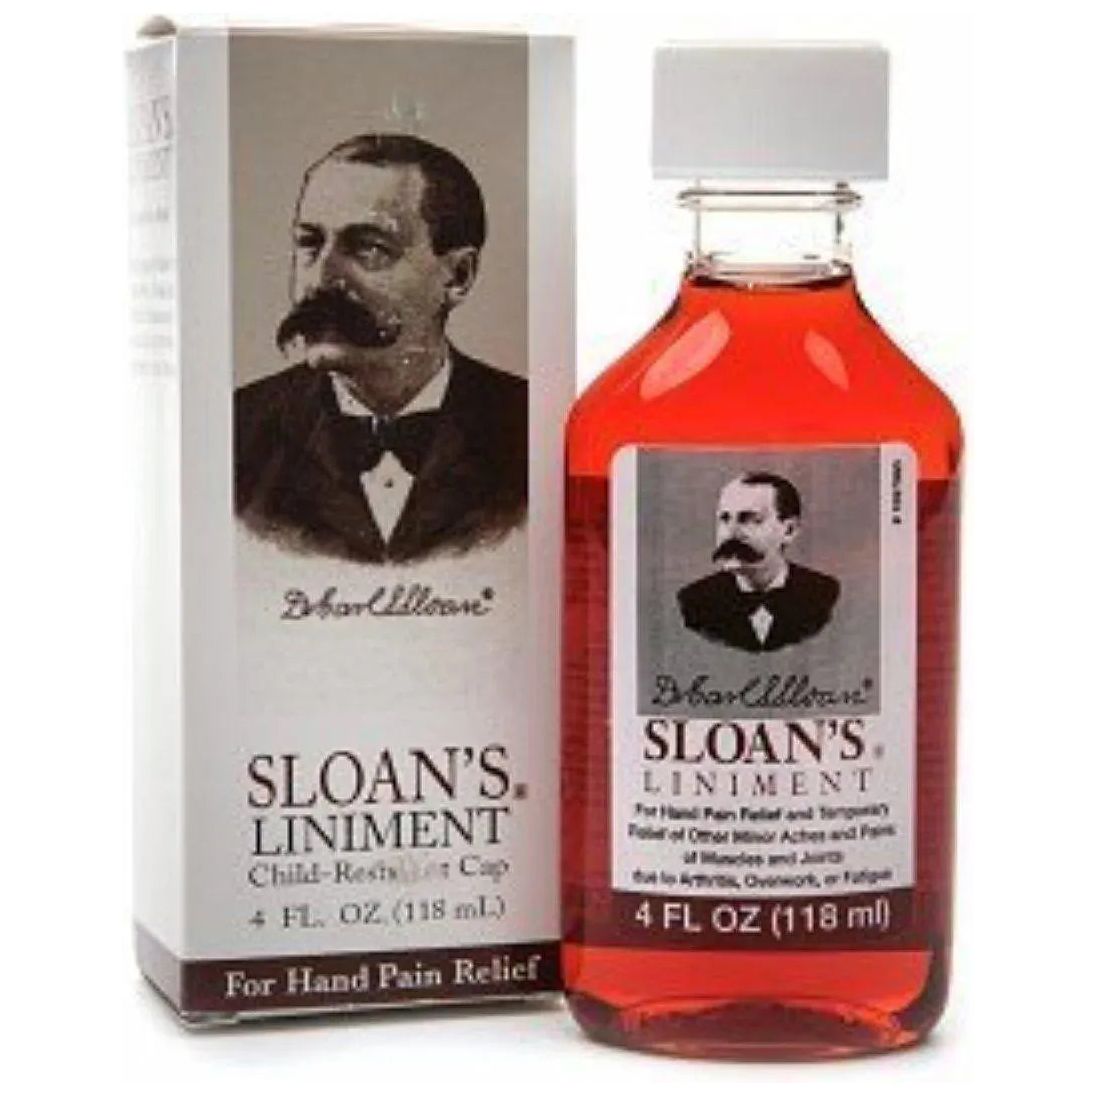 Sloan's Liniment 4 oz. - image 1 of 2